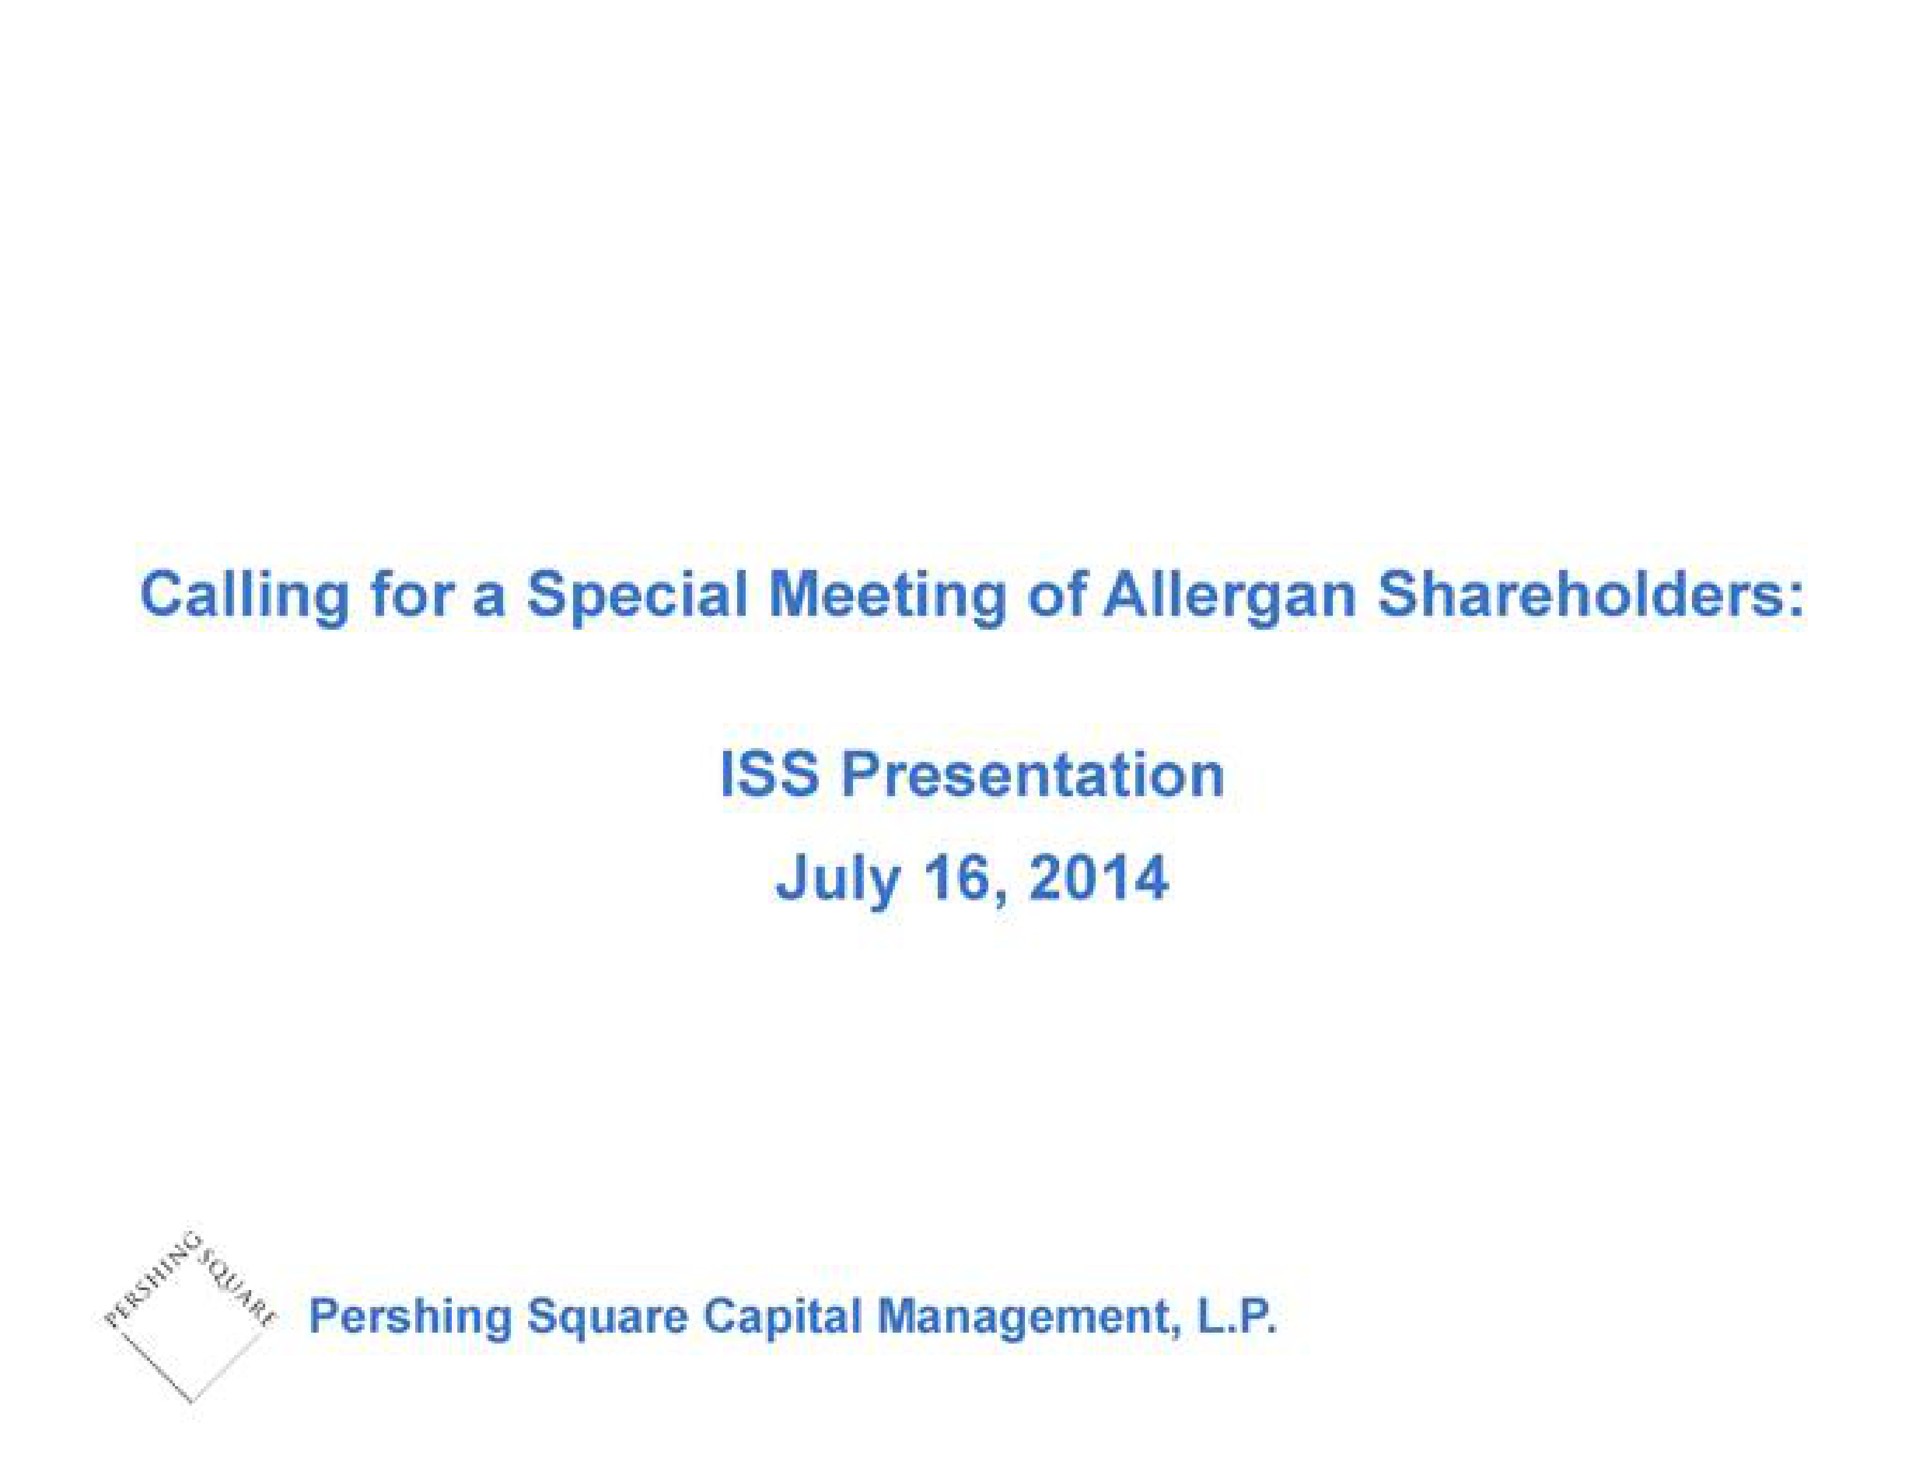 calling for a special meeting of shareholders iss presentation | Pershing Square